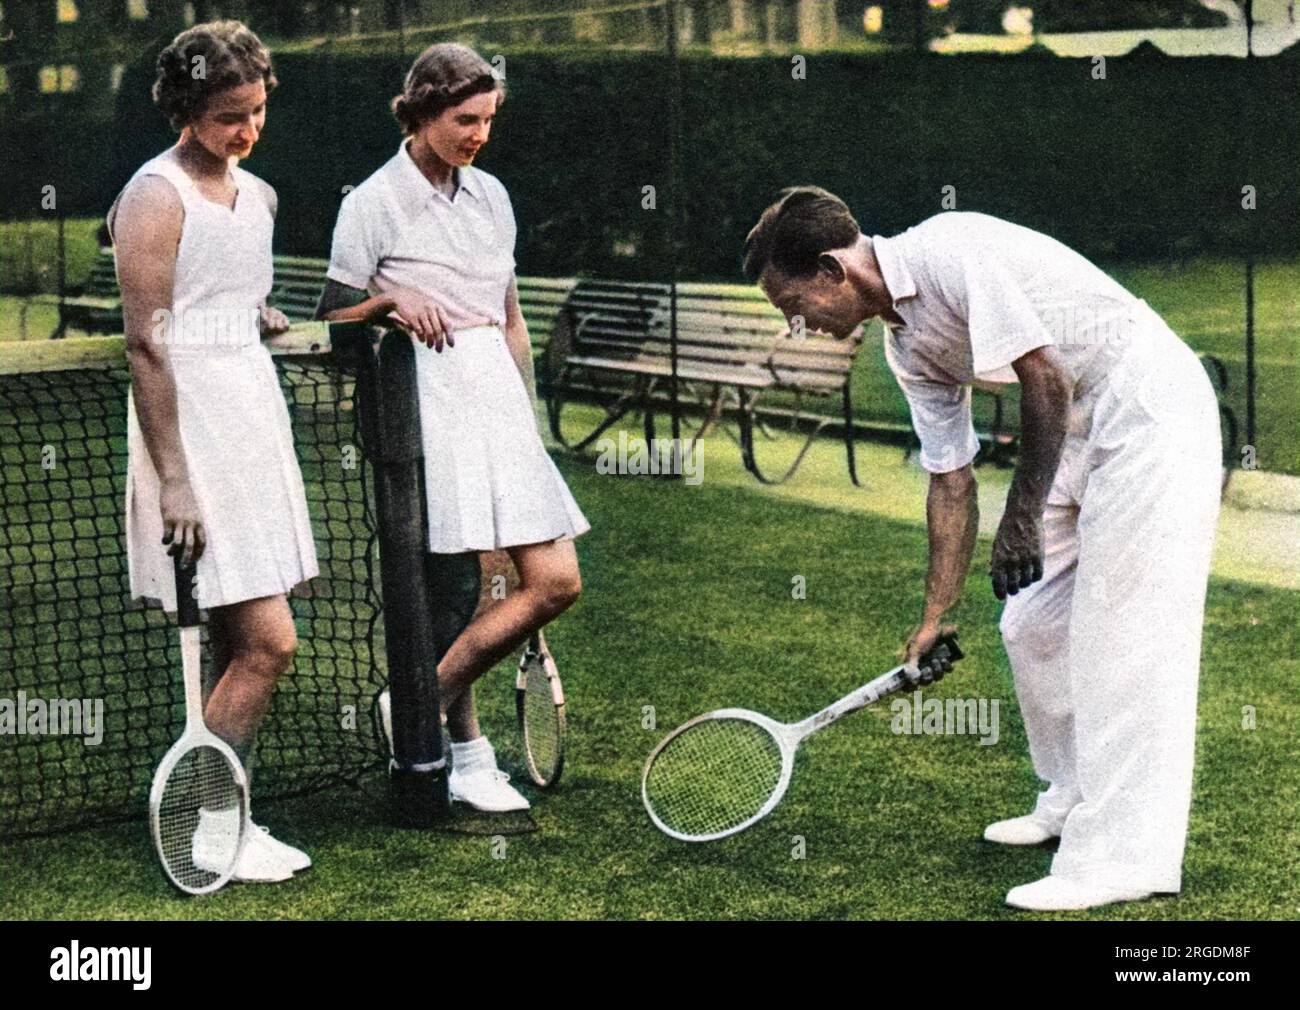 Dan Maskell (1908 - 1992), British tennis player, coach and later universally loved Wimbledon commentator.  Pictured showing Miss Mary Hardwick and Miss Kay Stammers the correct method of delivering a half-volley. Stock Photo